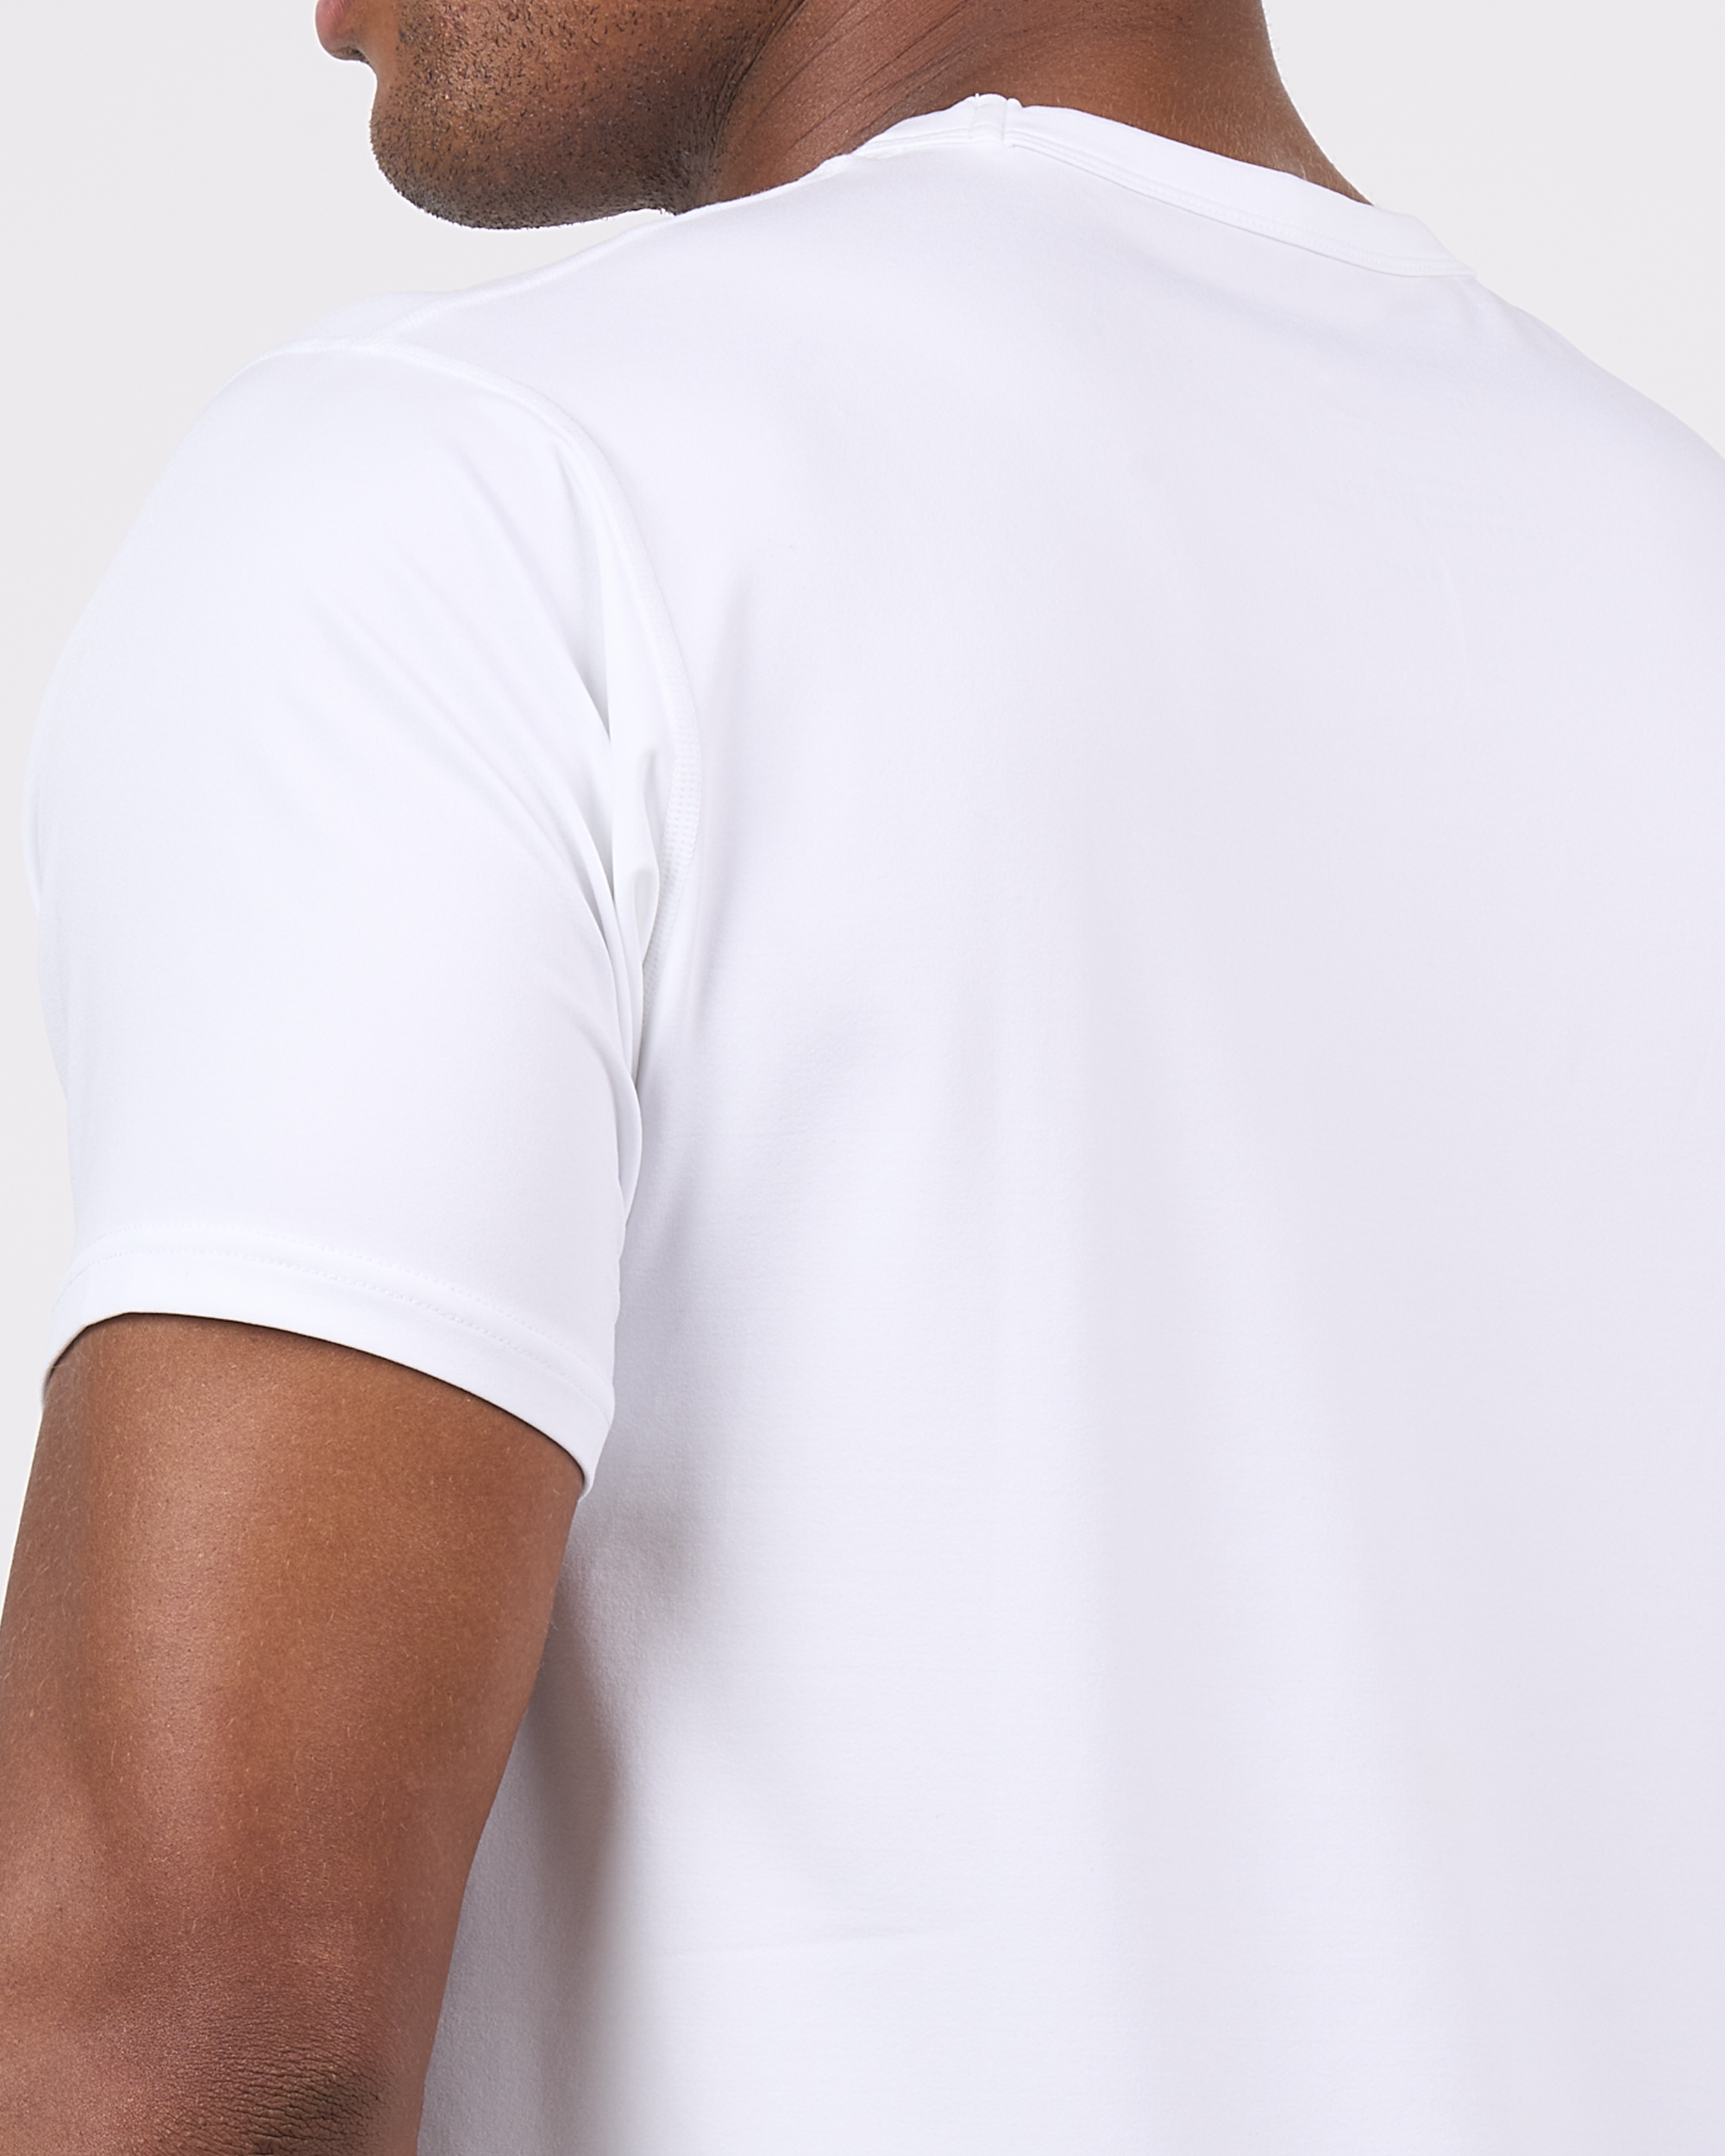 Foreign Rider Co White Technical Fabric Short Sleeve T-Shirt Shoulder Detail